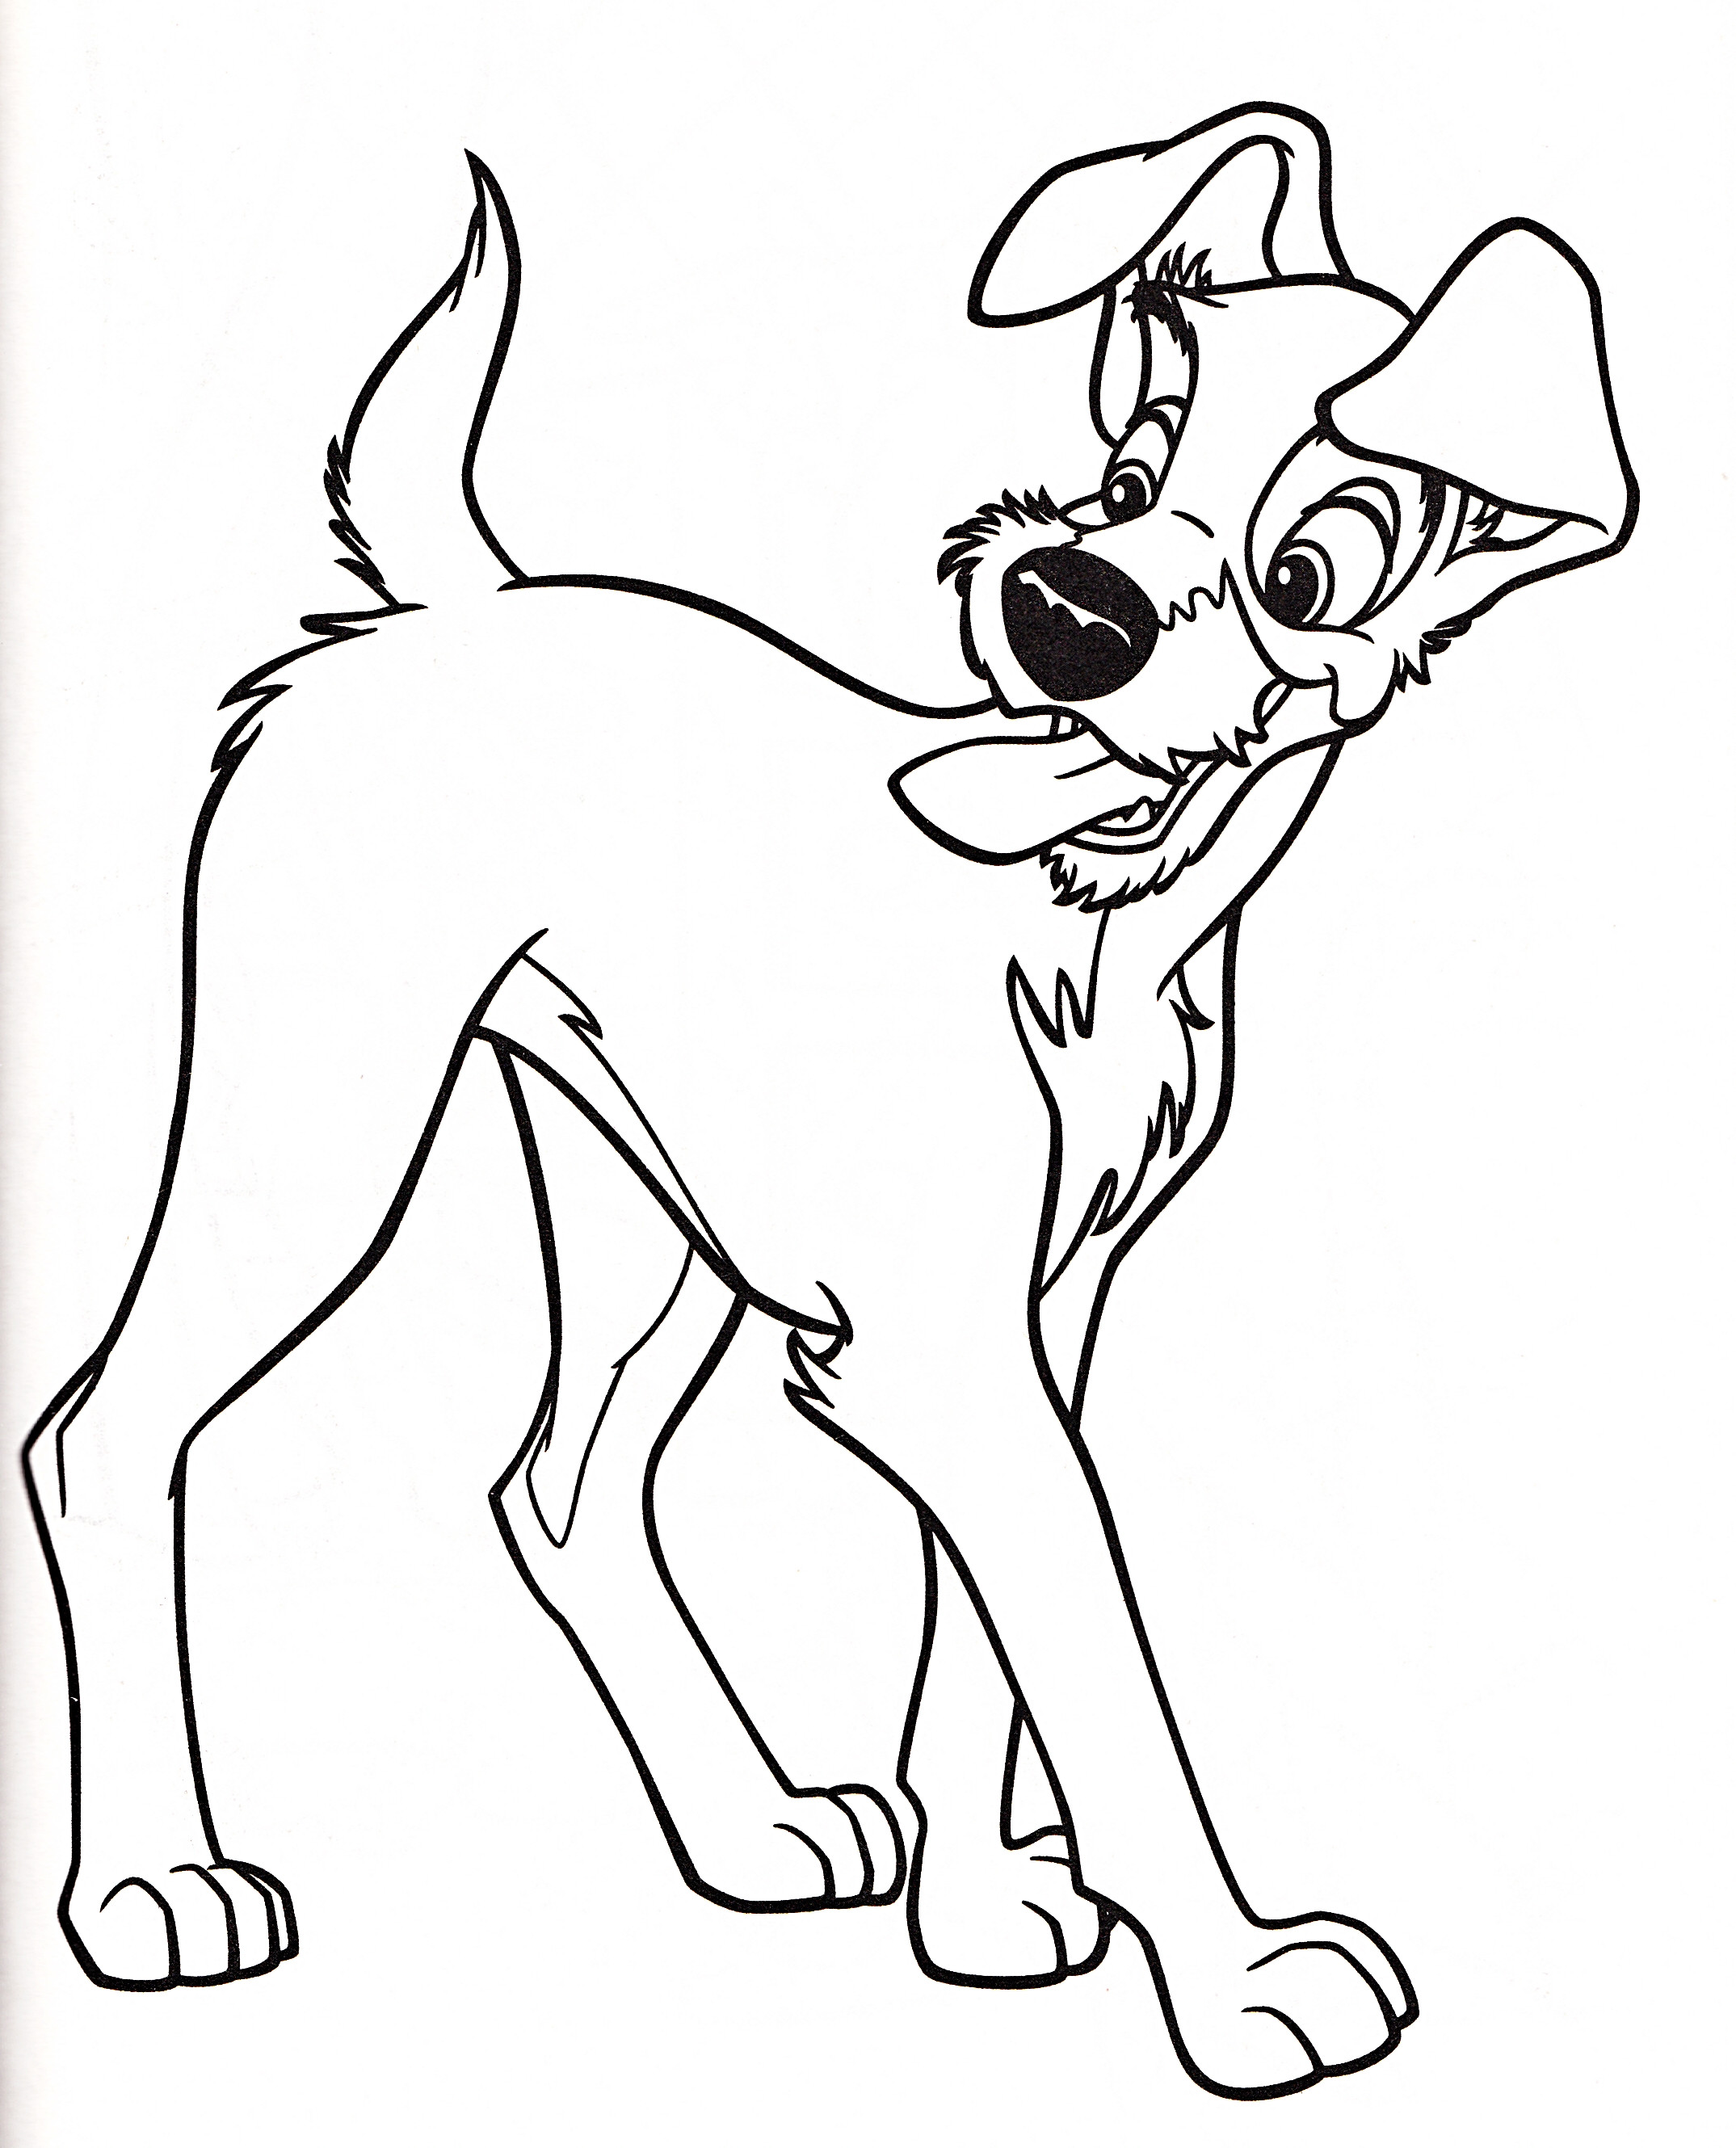 Lady And The Tramp Coloring Pages
 34 Lady And The Tramp Coloring Pages Coloring Games Free